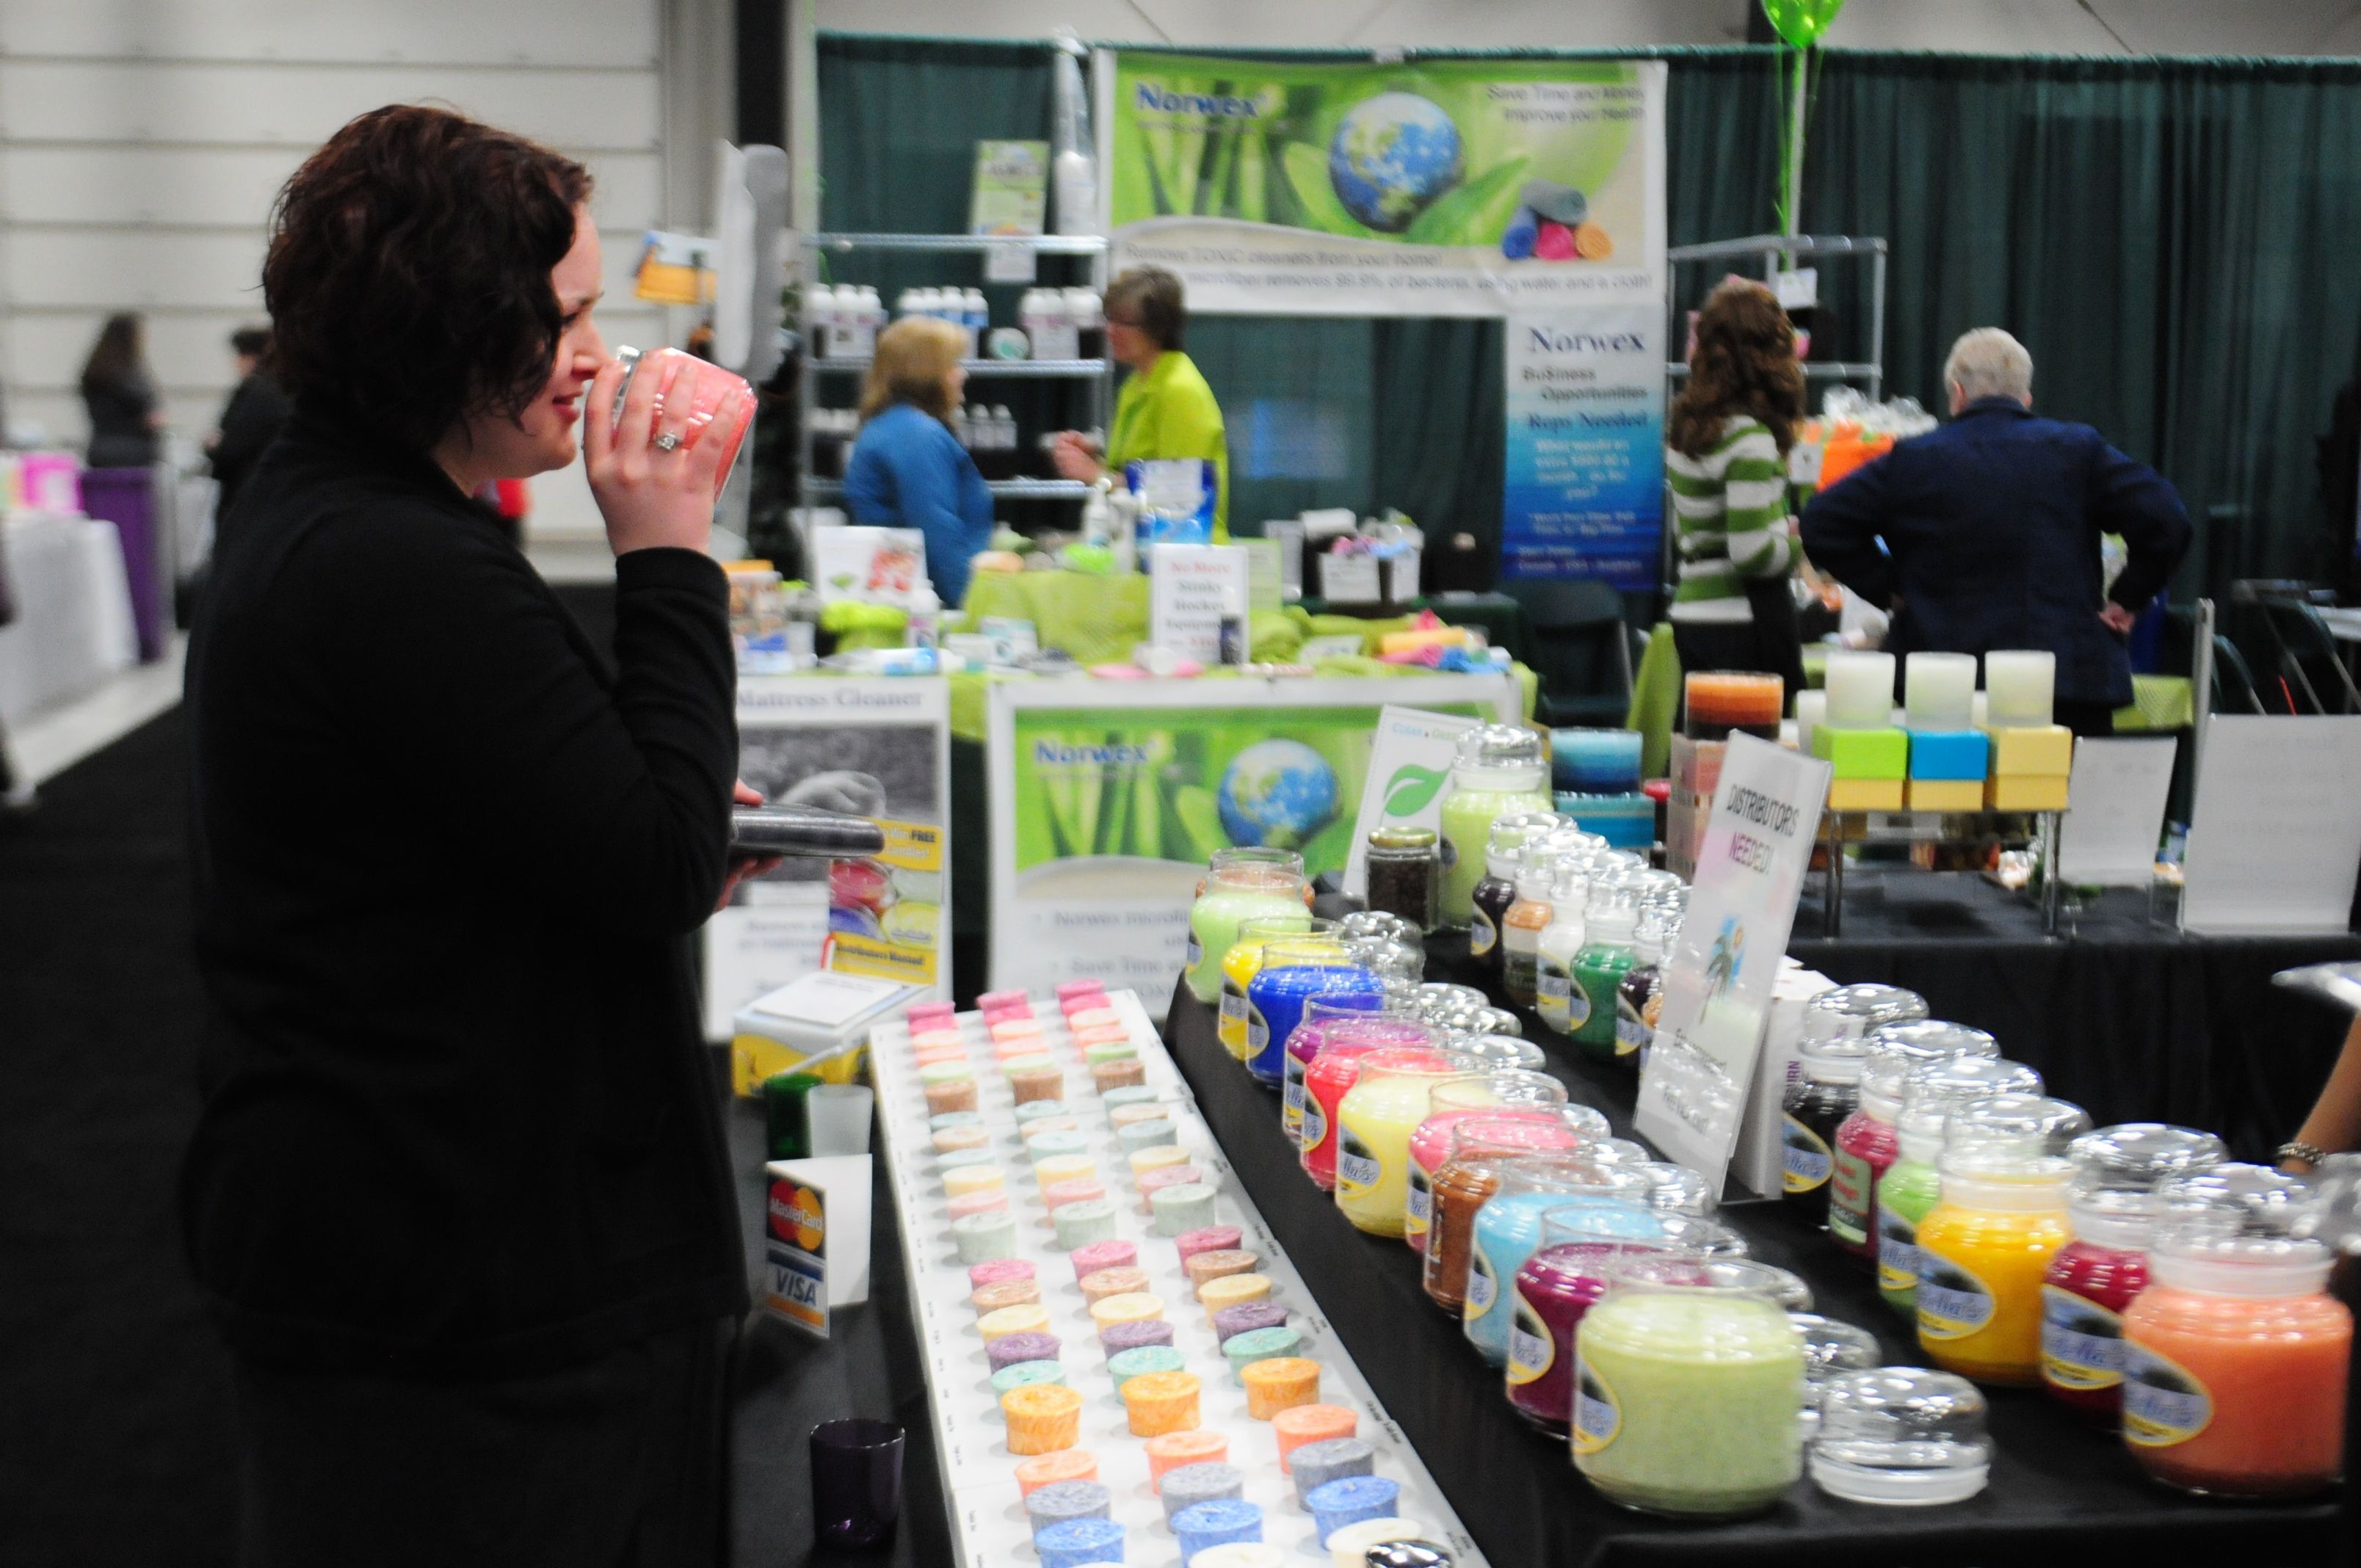 SCENTS- A wonderful display of scented candles was just one of the attractions at this year's Red Deer Health and Wellness Show that took place this past weekend at the westerner.